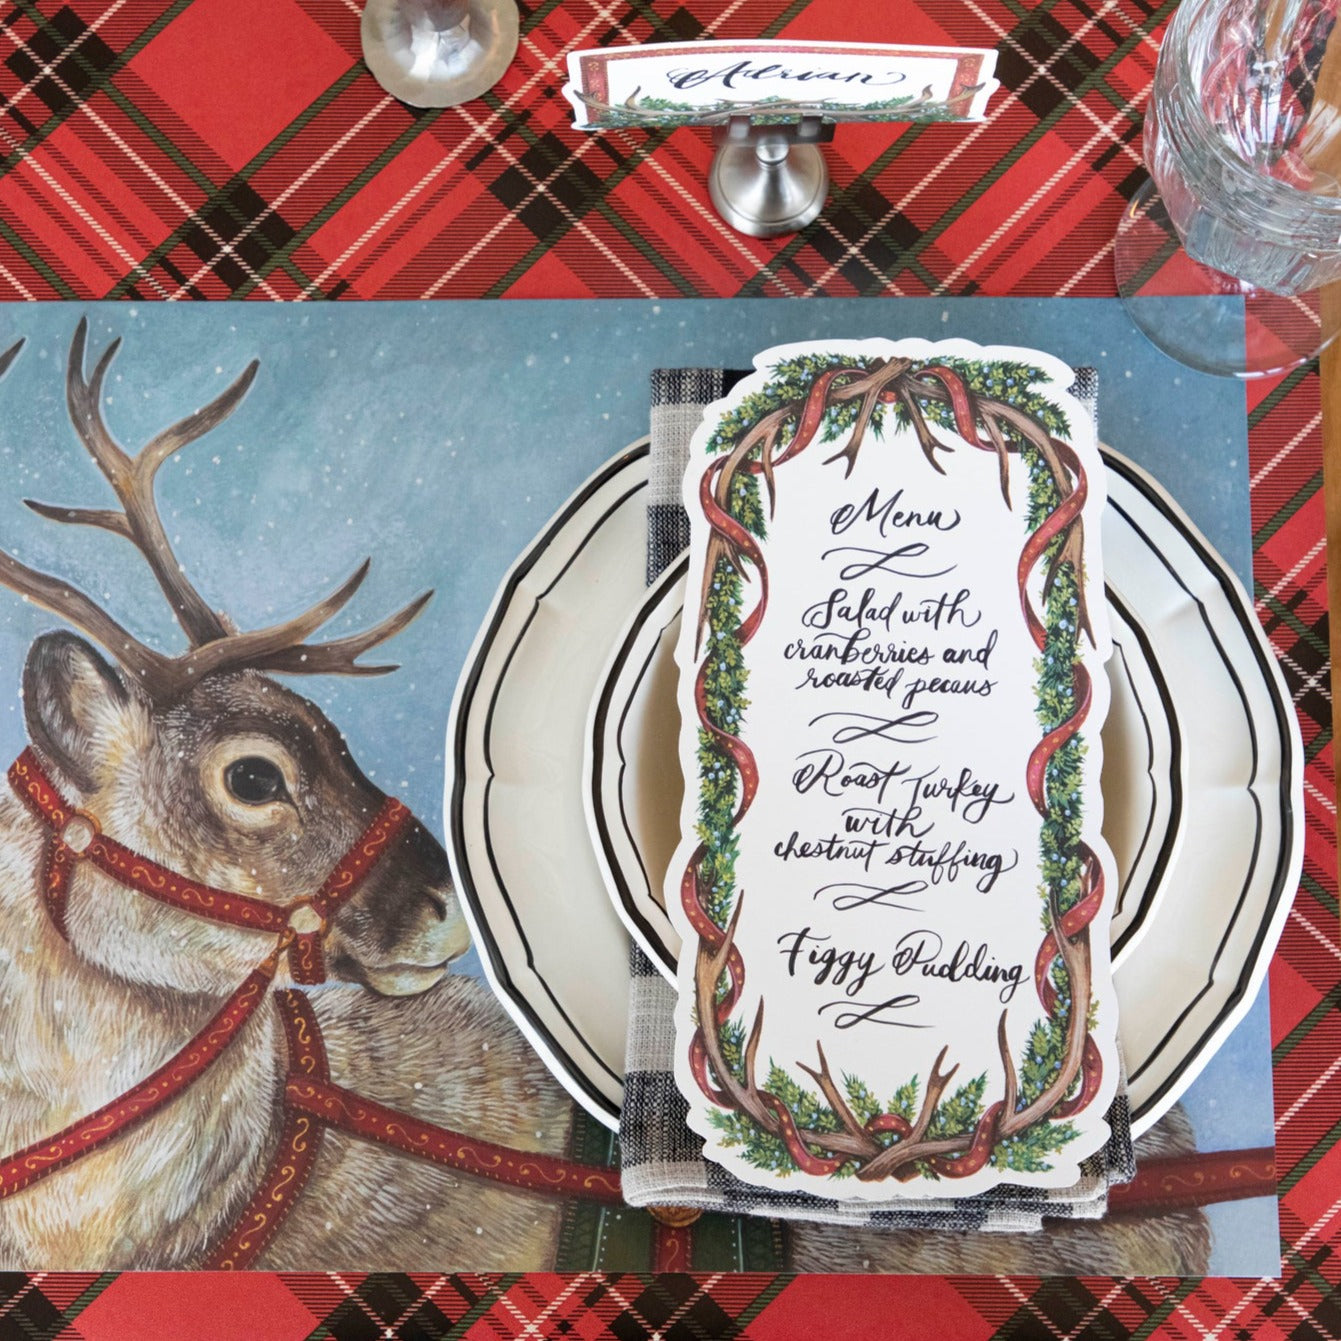 An Antler Garland Table Card with a menu written on it in lovely cursive, resting on the plate of a reindeer-themed Christmas place setting.